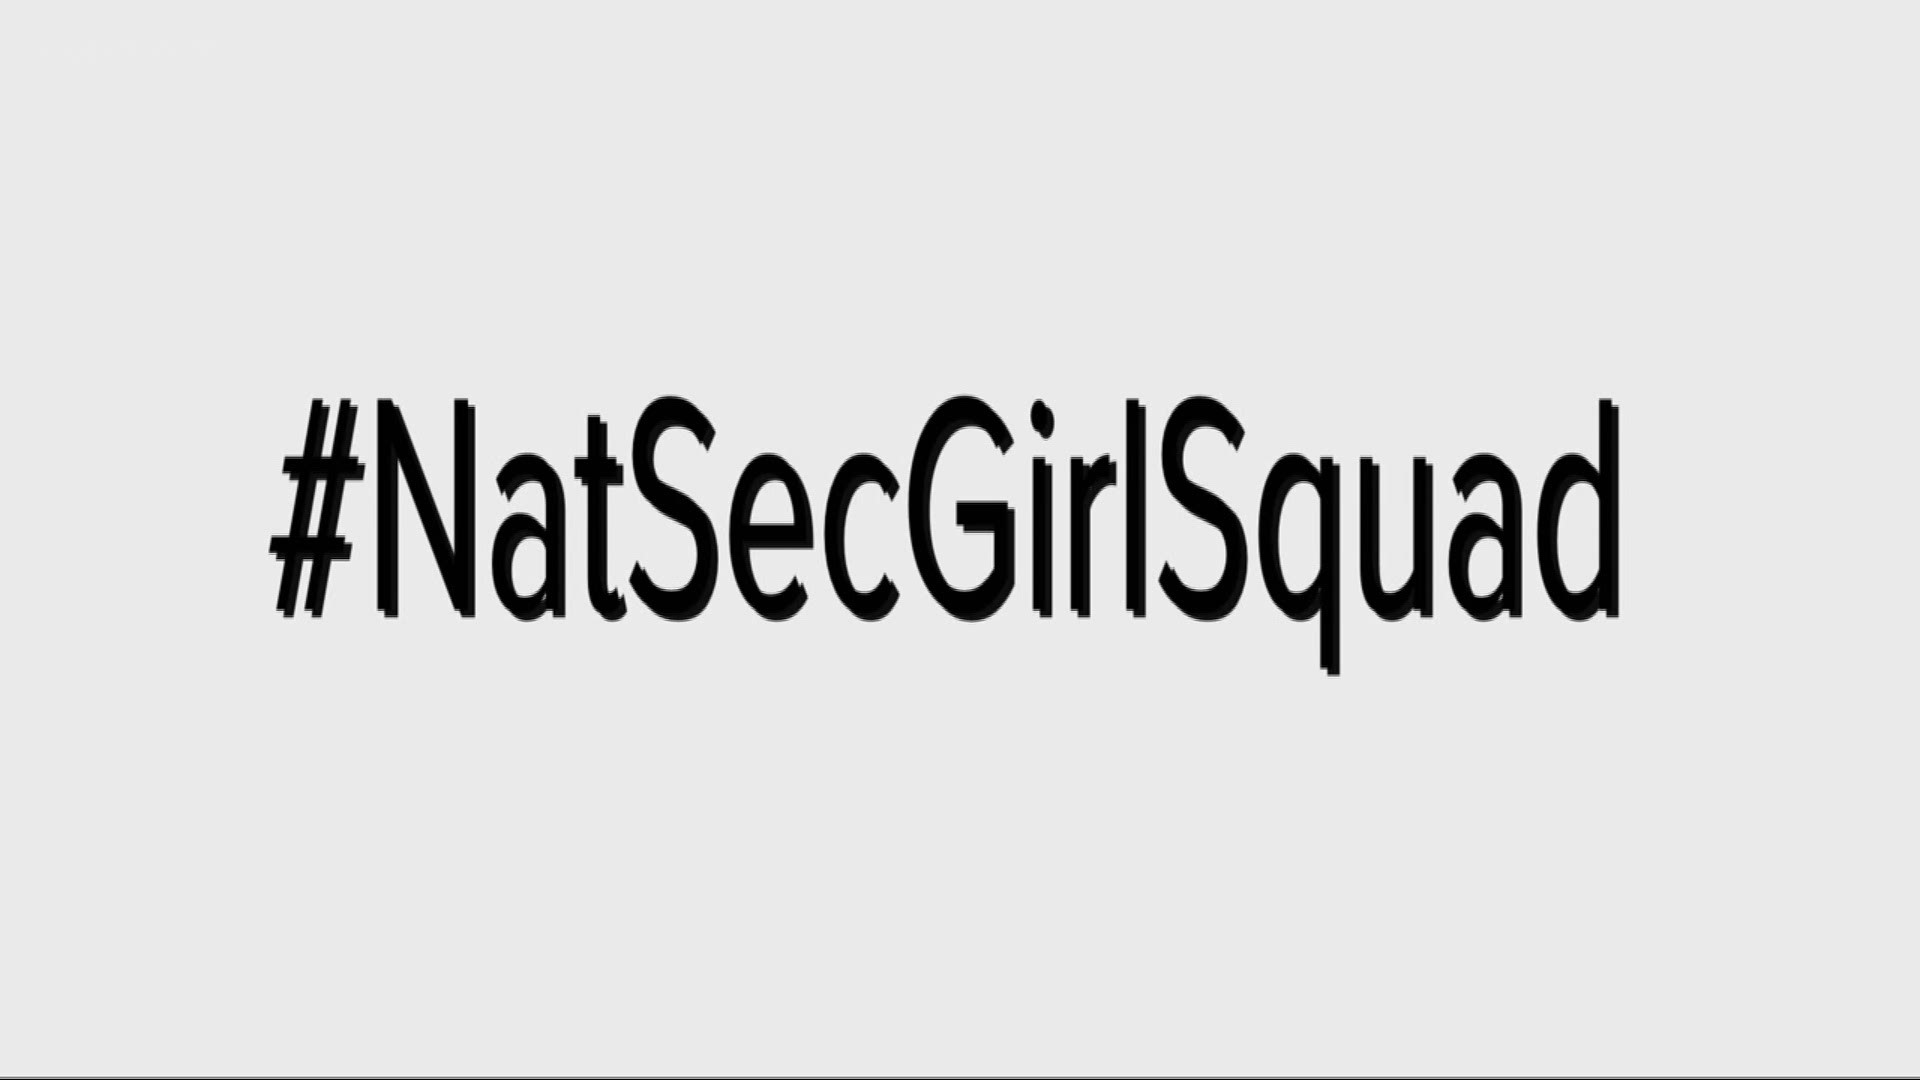 #NATSECGIRLSQUAD is a grassroots networking organization for women who work in national security.